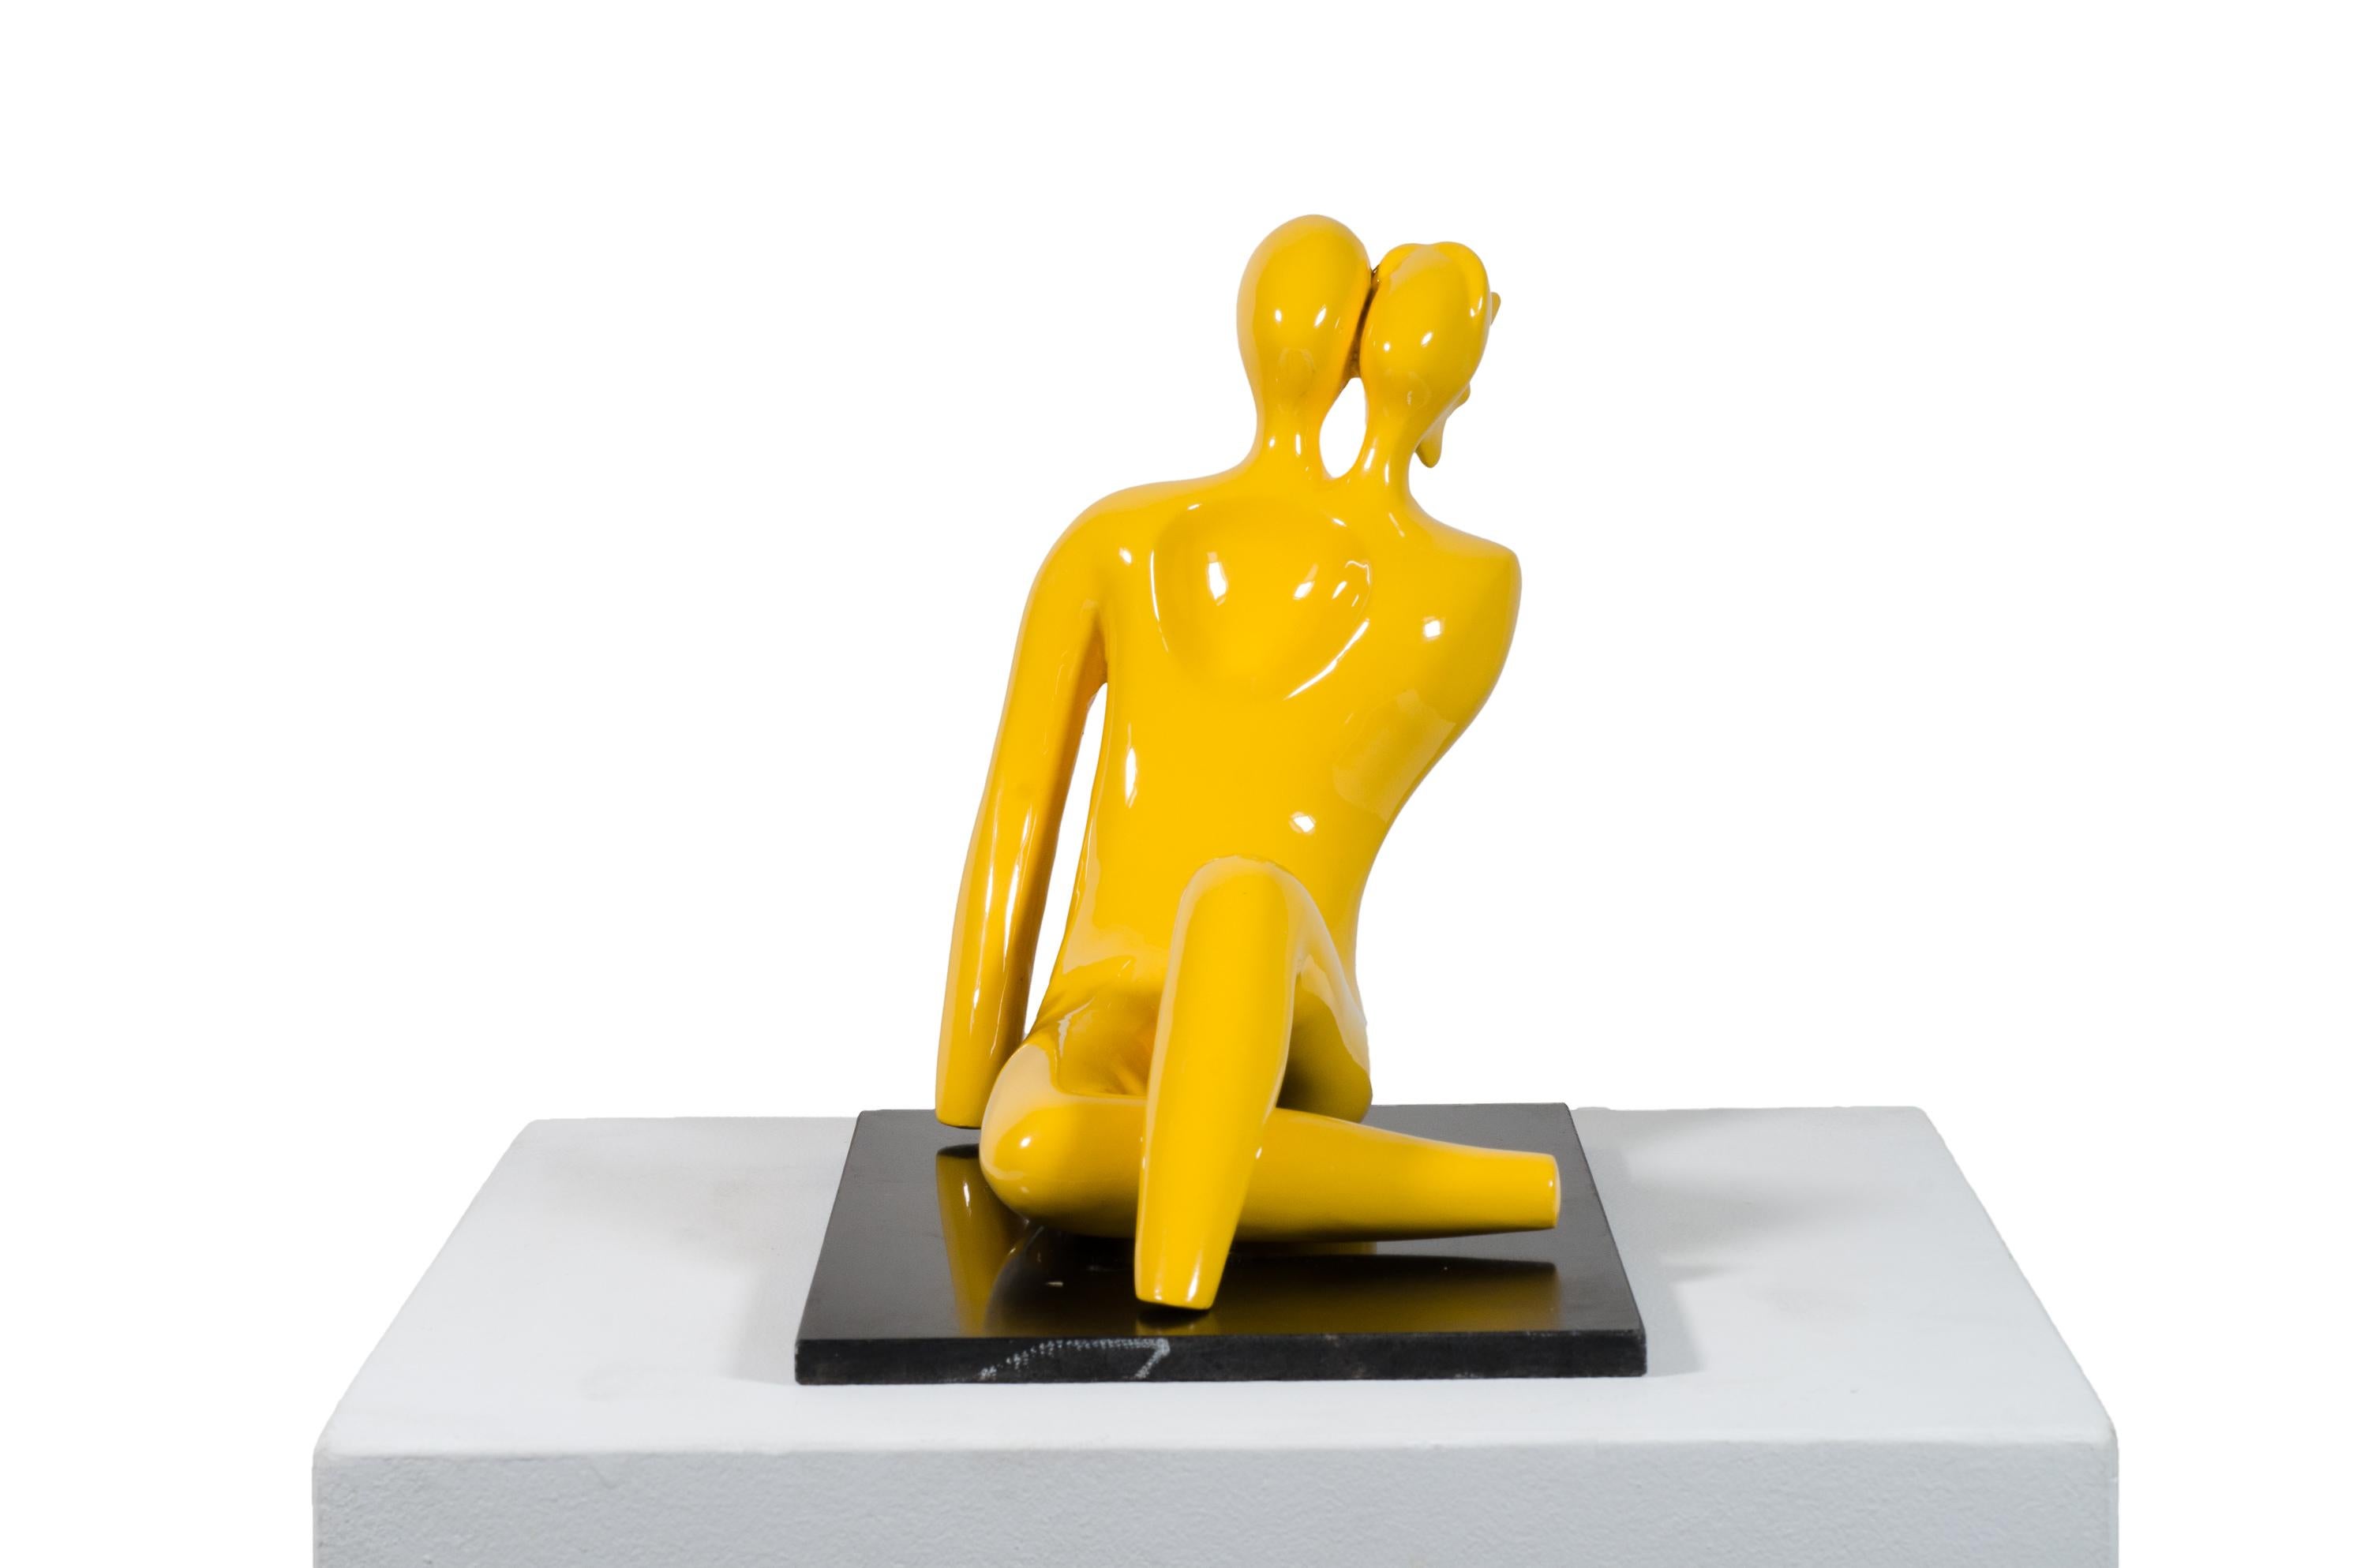 Beatriz Gerenstein Abstract Sculpture - Soul Mates #2 (in yellow) When in love their souls and bodies fuse into just one